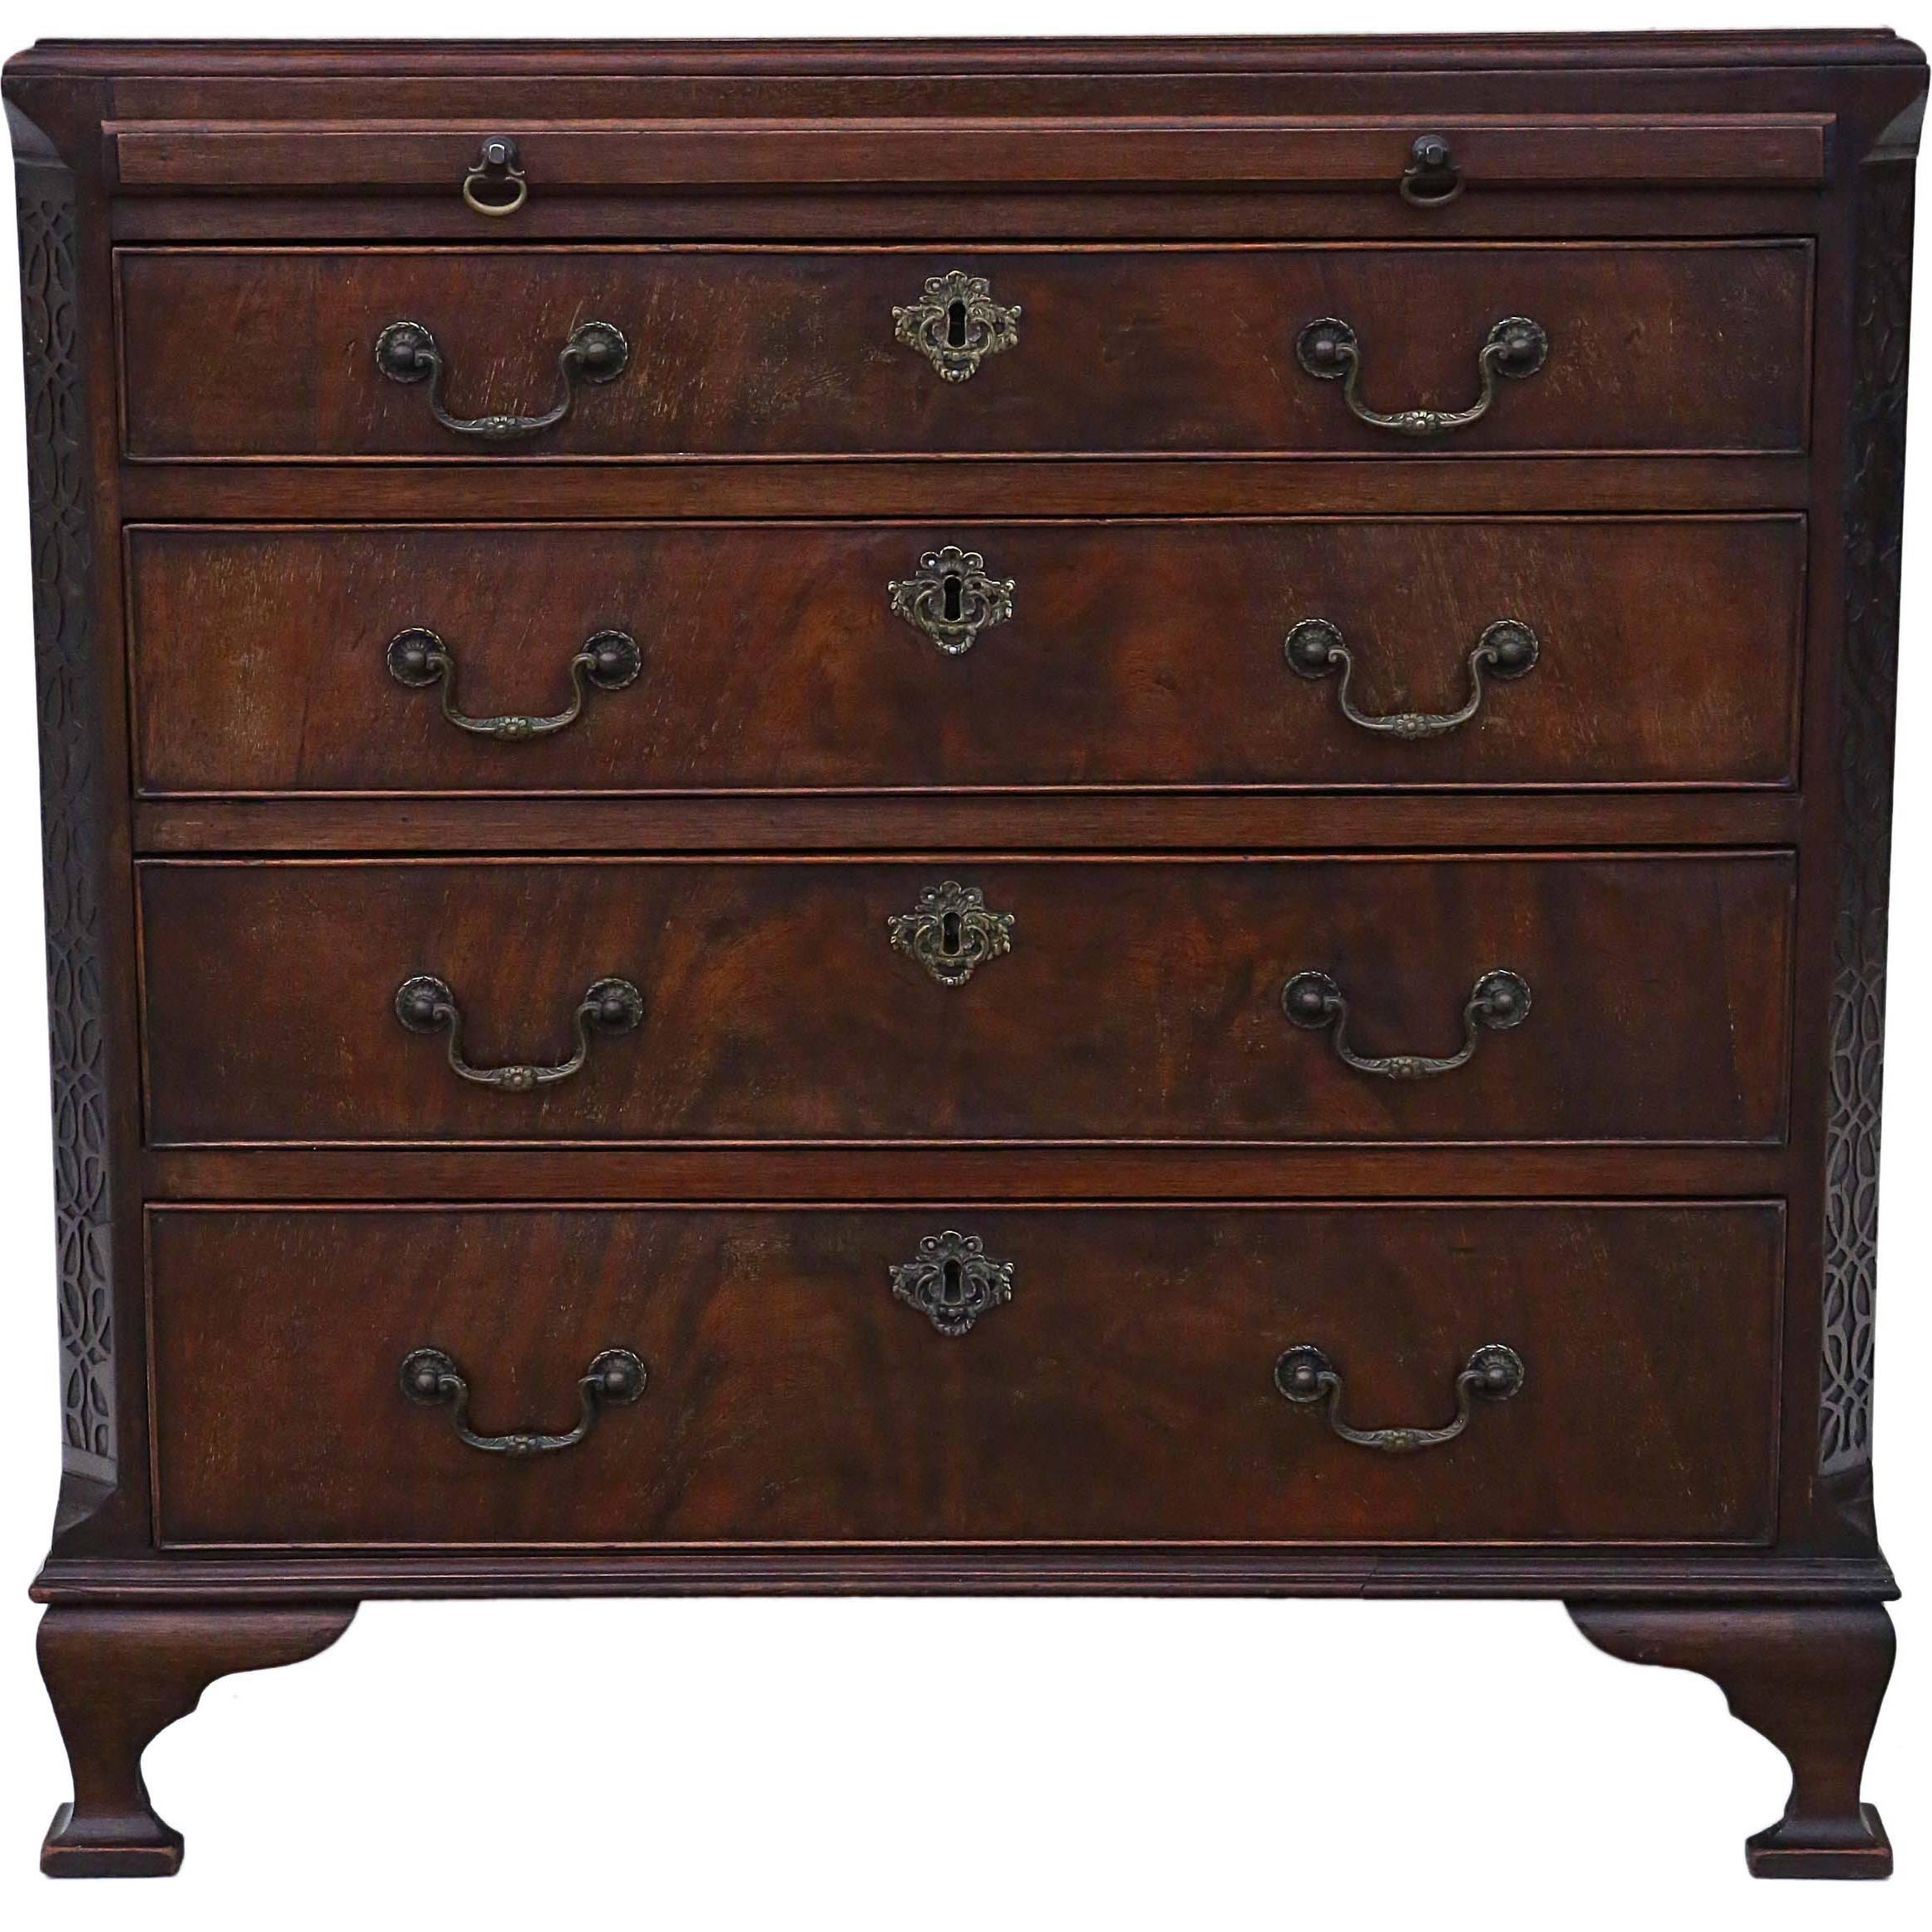 Antique Quality Small Georgian Revival, circa 1910 Mahogany Chest of Drawers For Sale